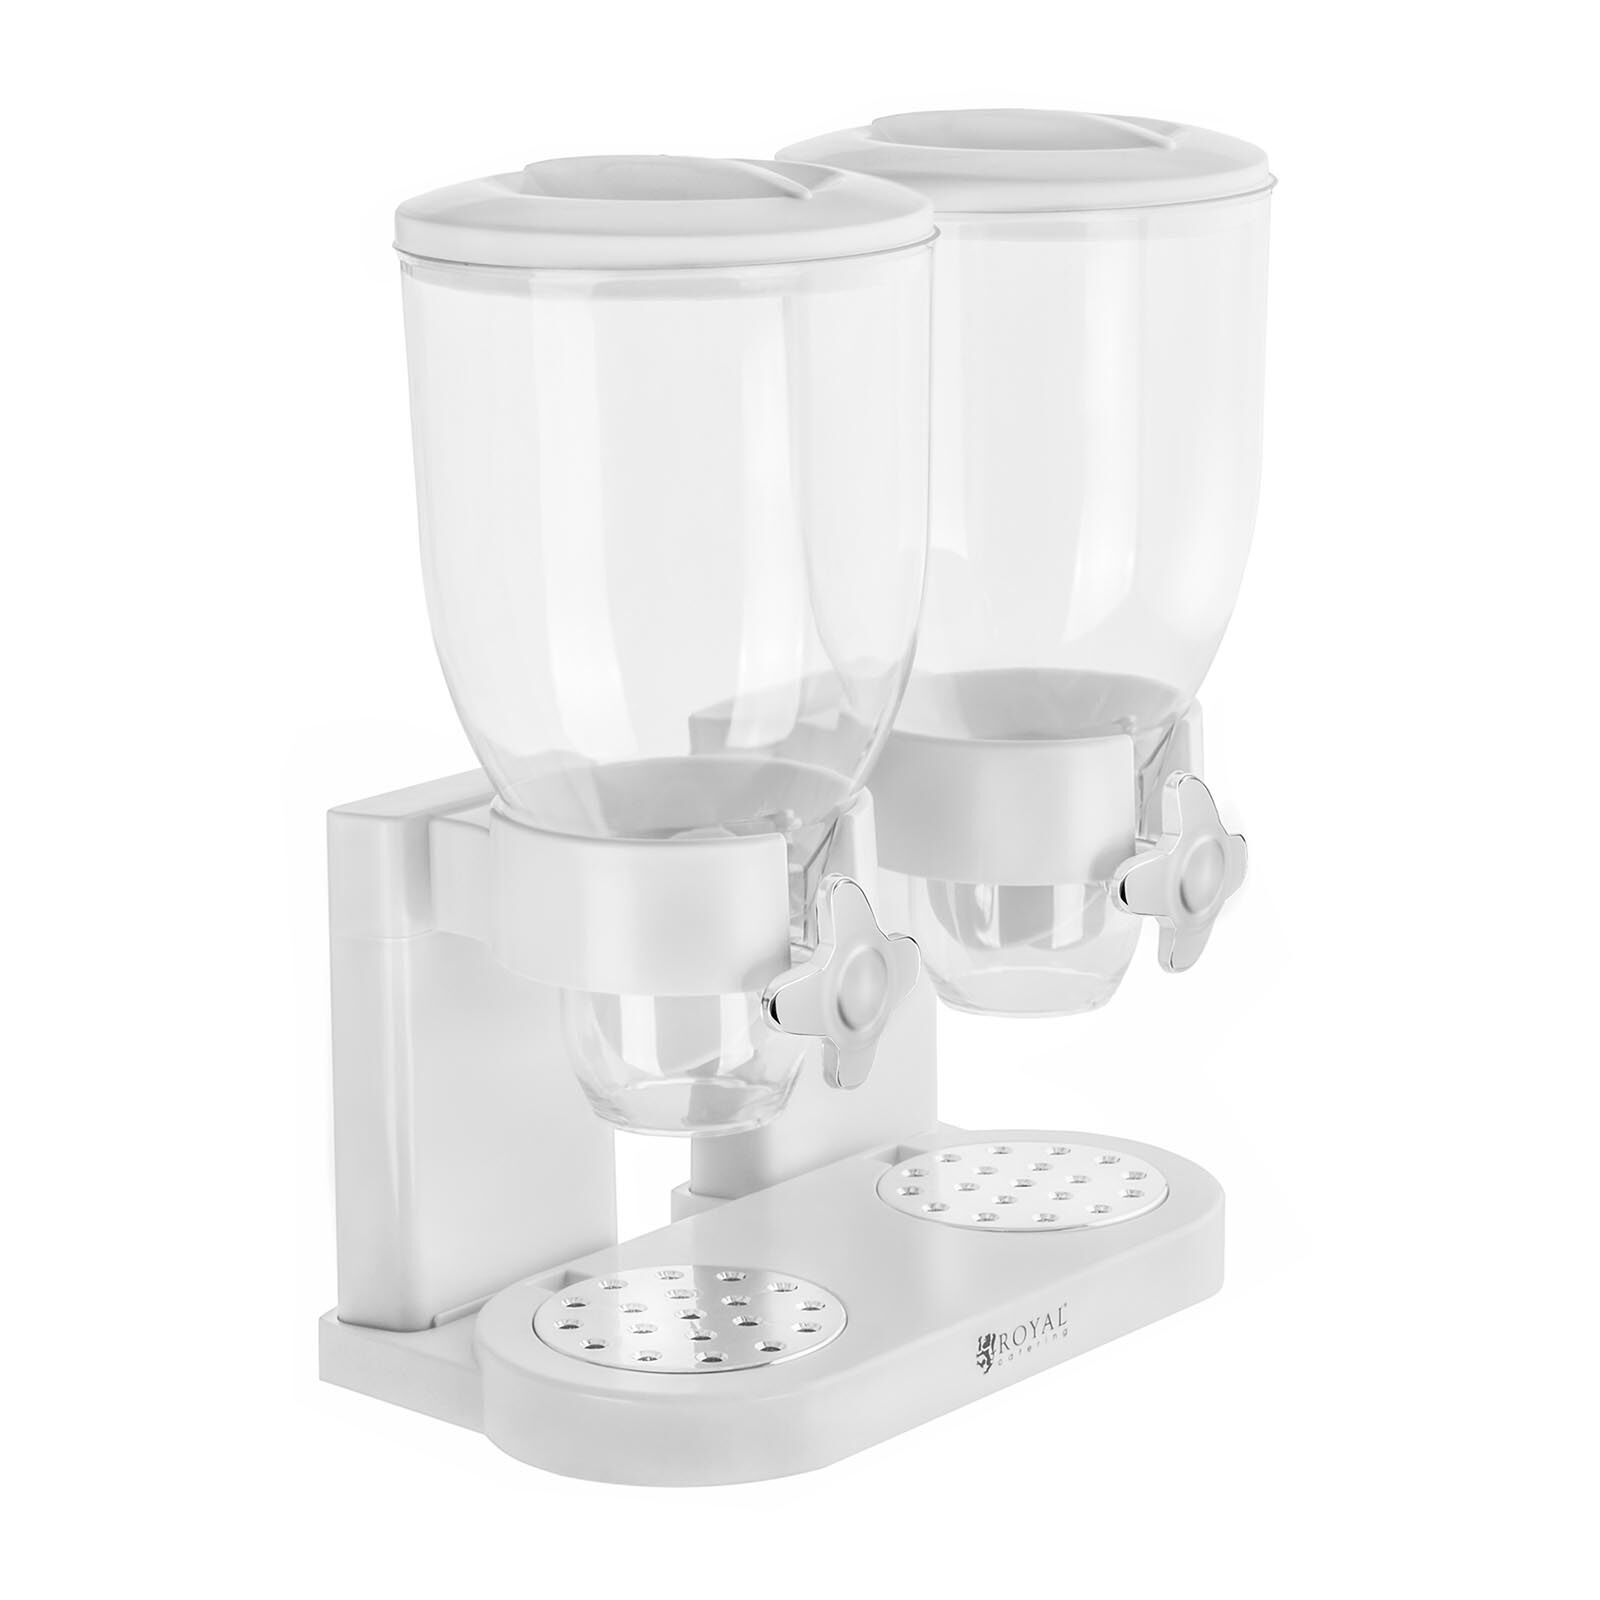 Royal Catering Cereal Dispenser 7 L - 2 containers RCCS-7L/2